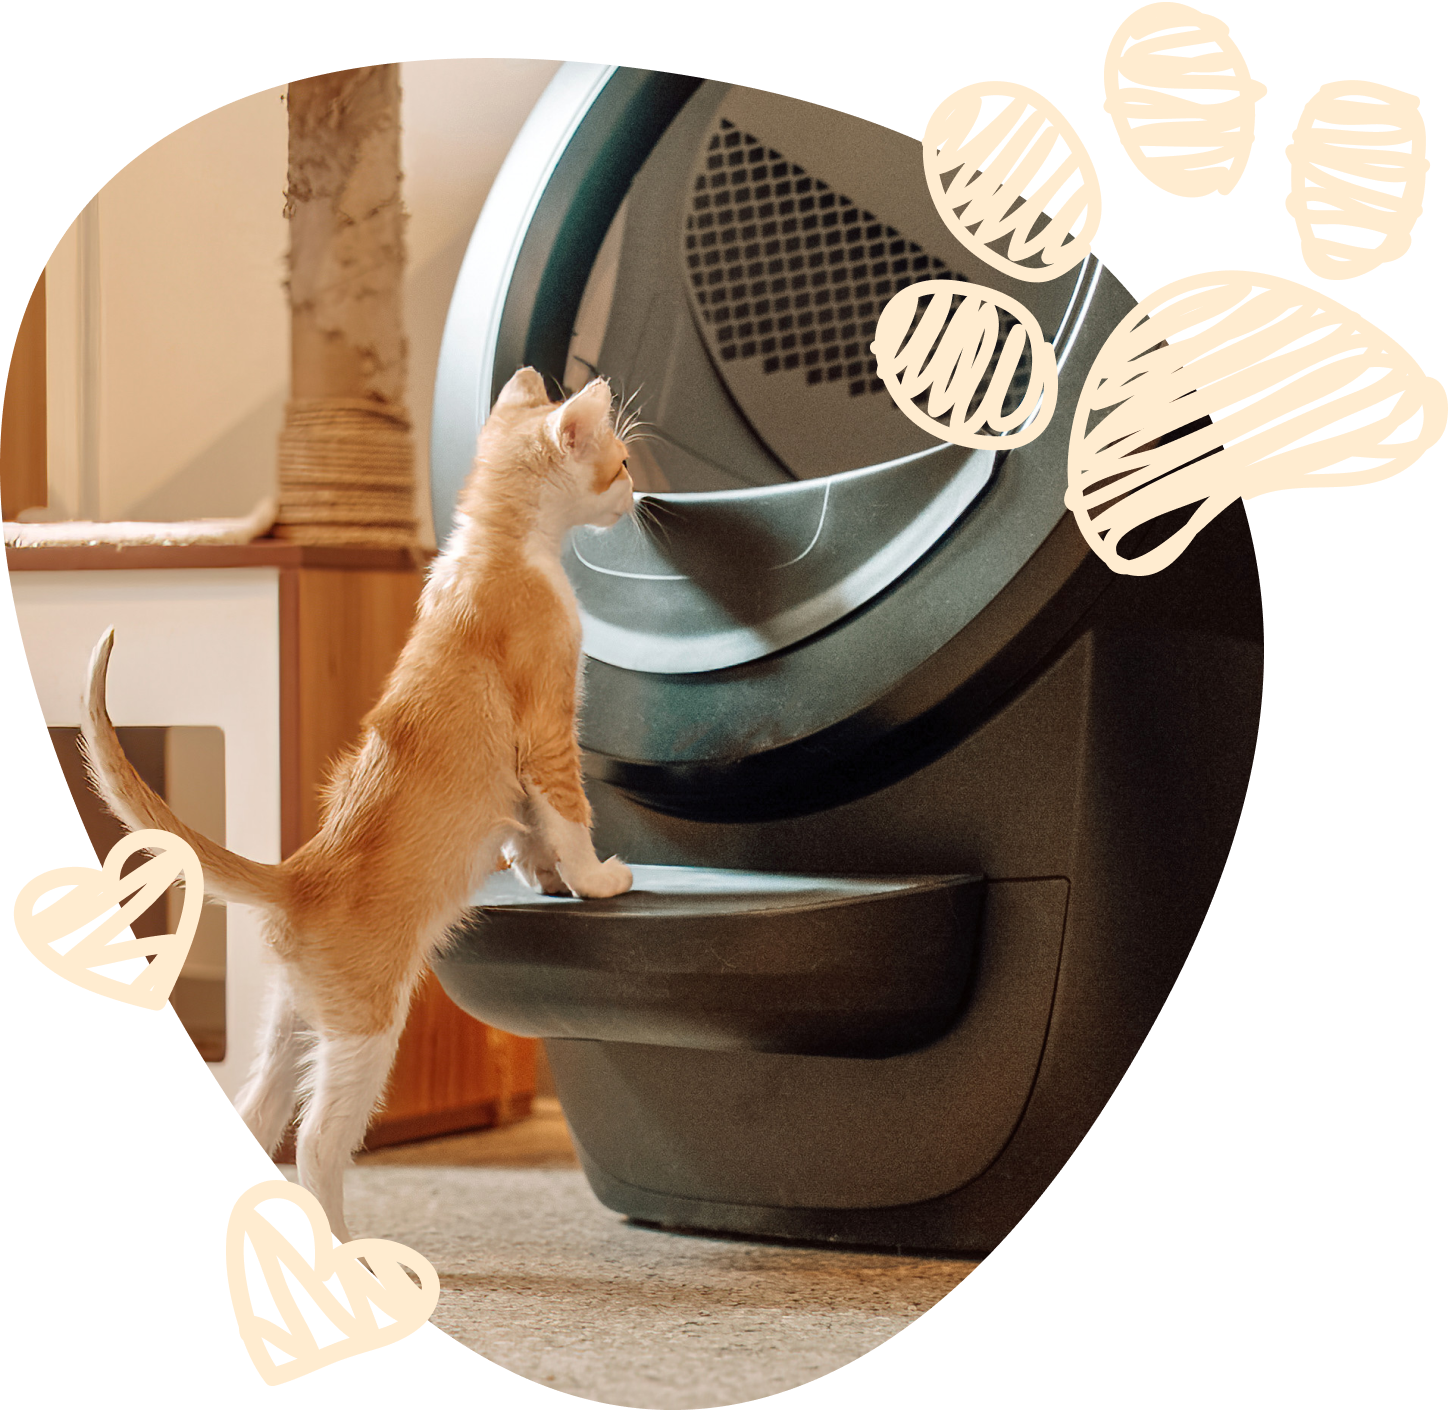 An image of a small orange kitten using their two front paws to look into a black Litter-Robot.